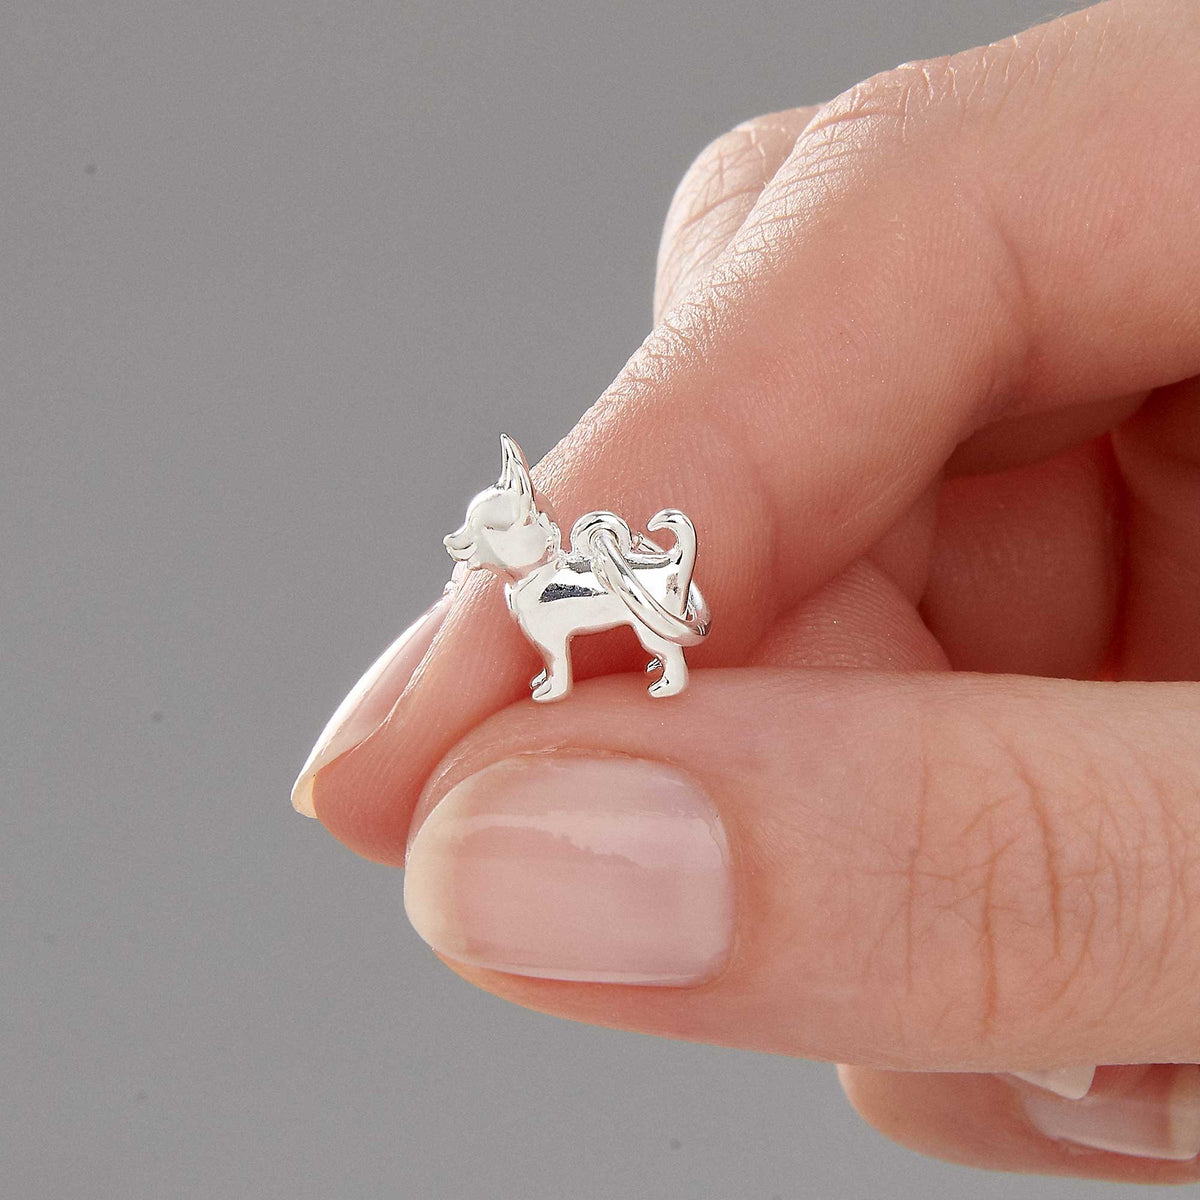 Chihuahua dog breed solid sterling silver dog charm for bracelet Scarlett Jewellery Ltd